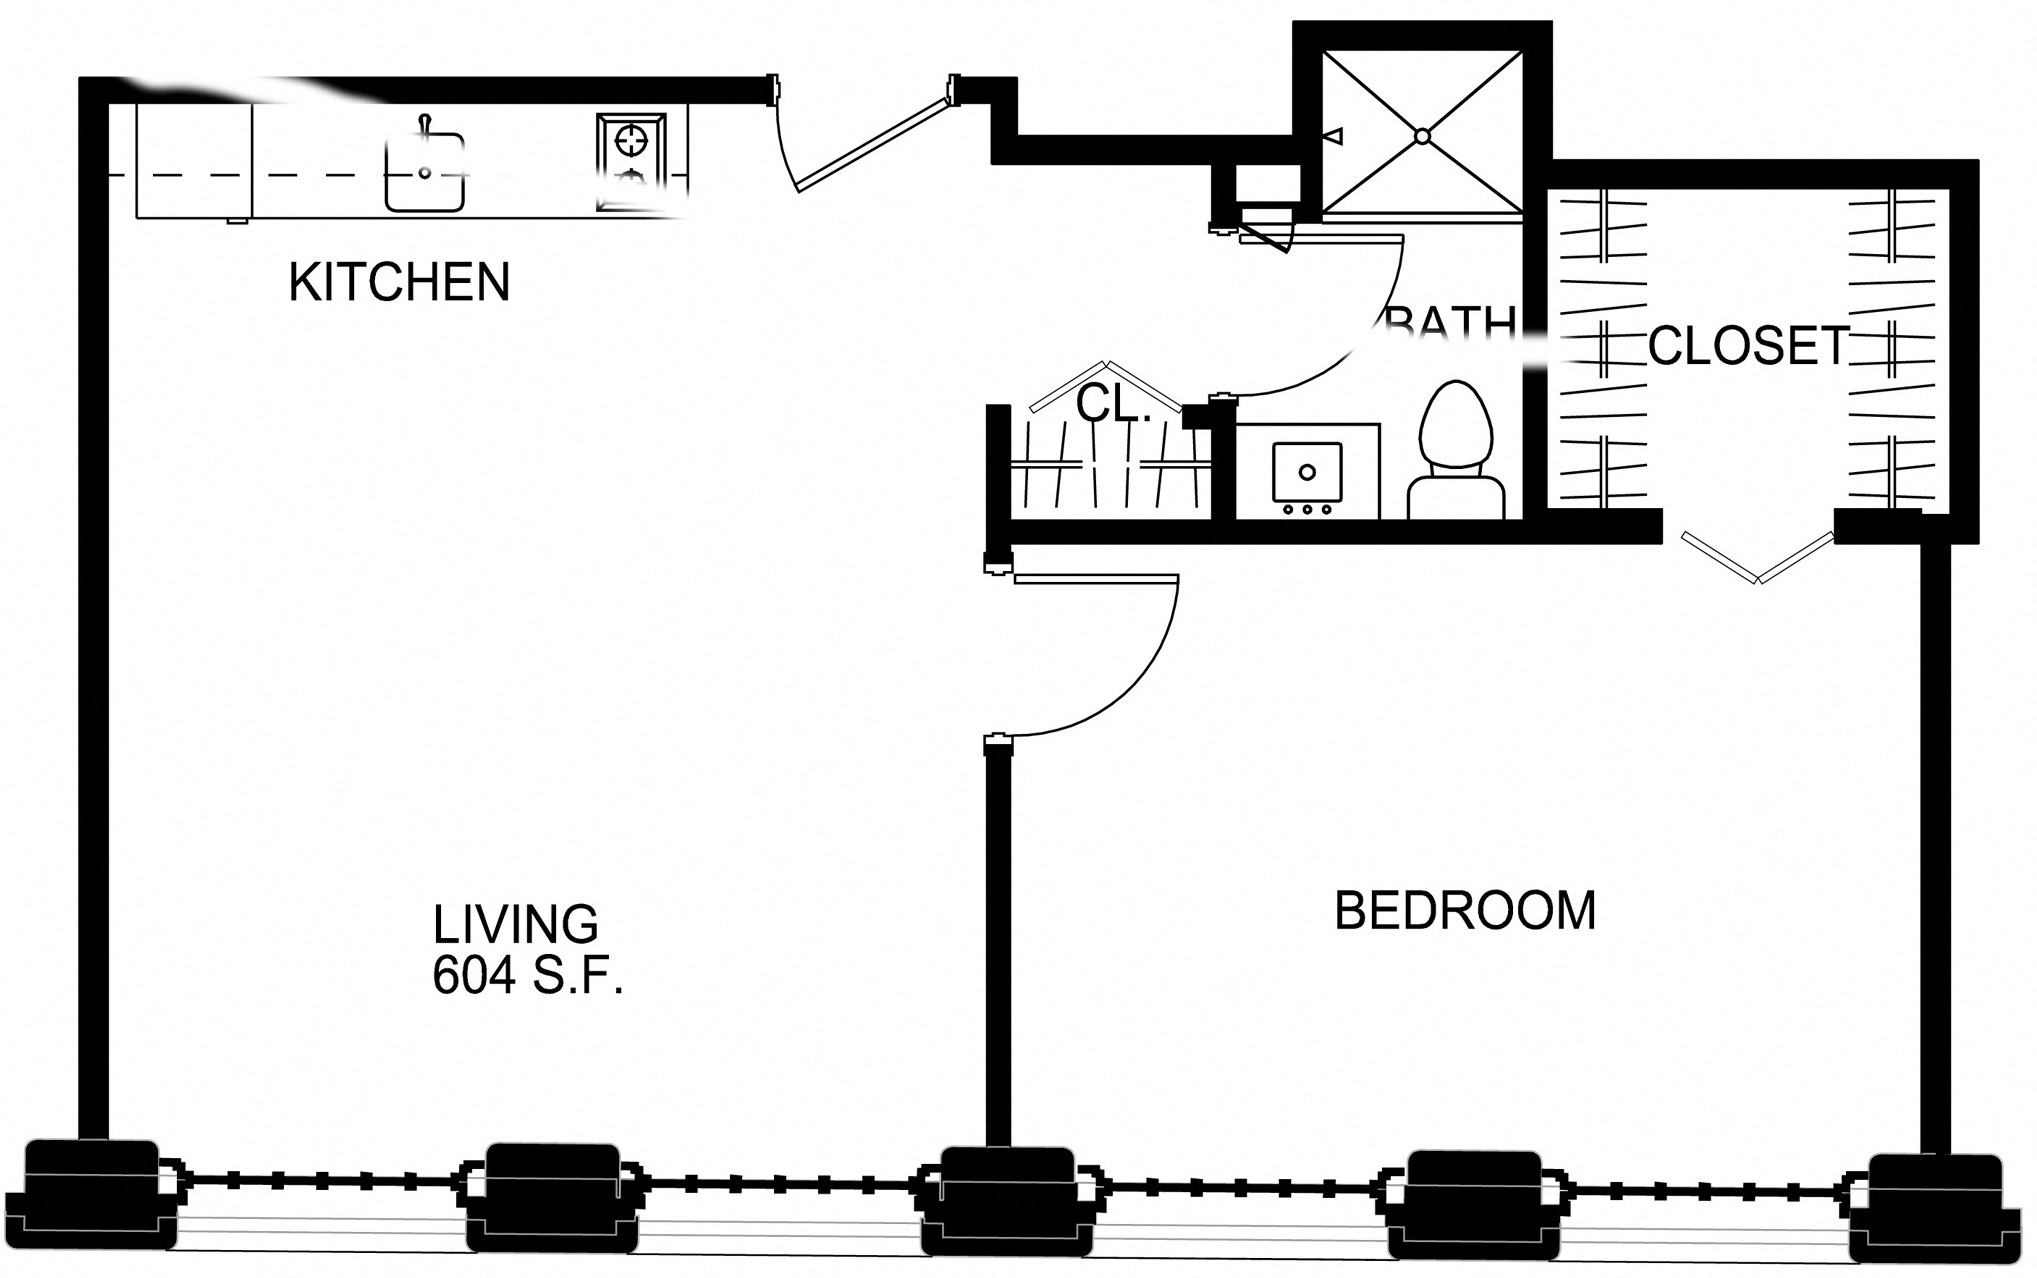 Floorplan for Apartment #S2633, 1 bedroom unit at Halstead Providence